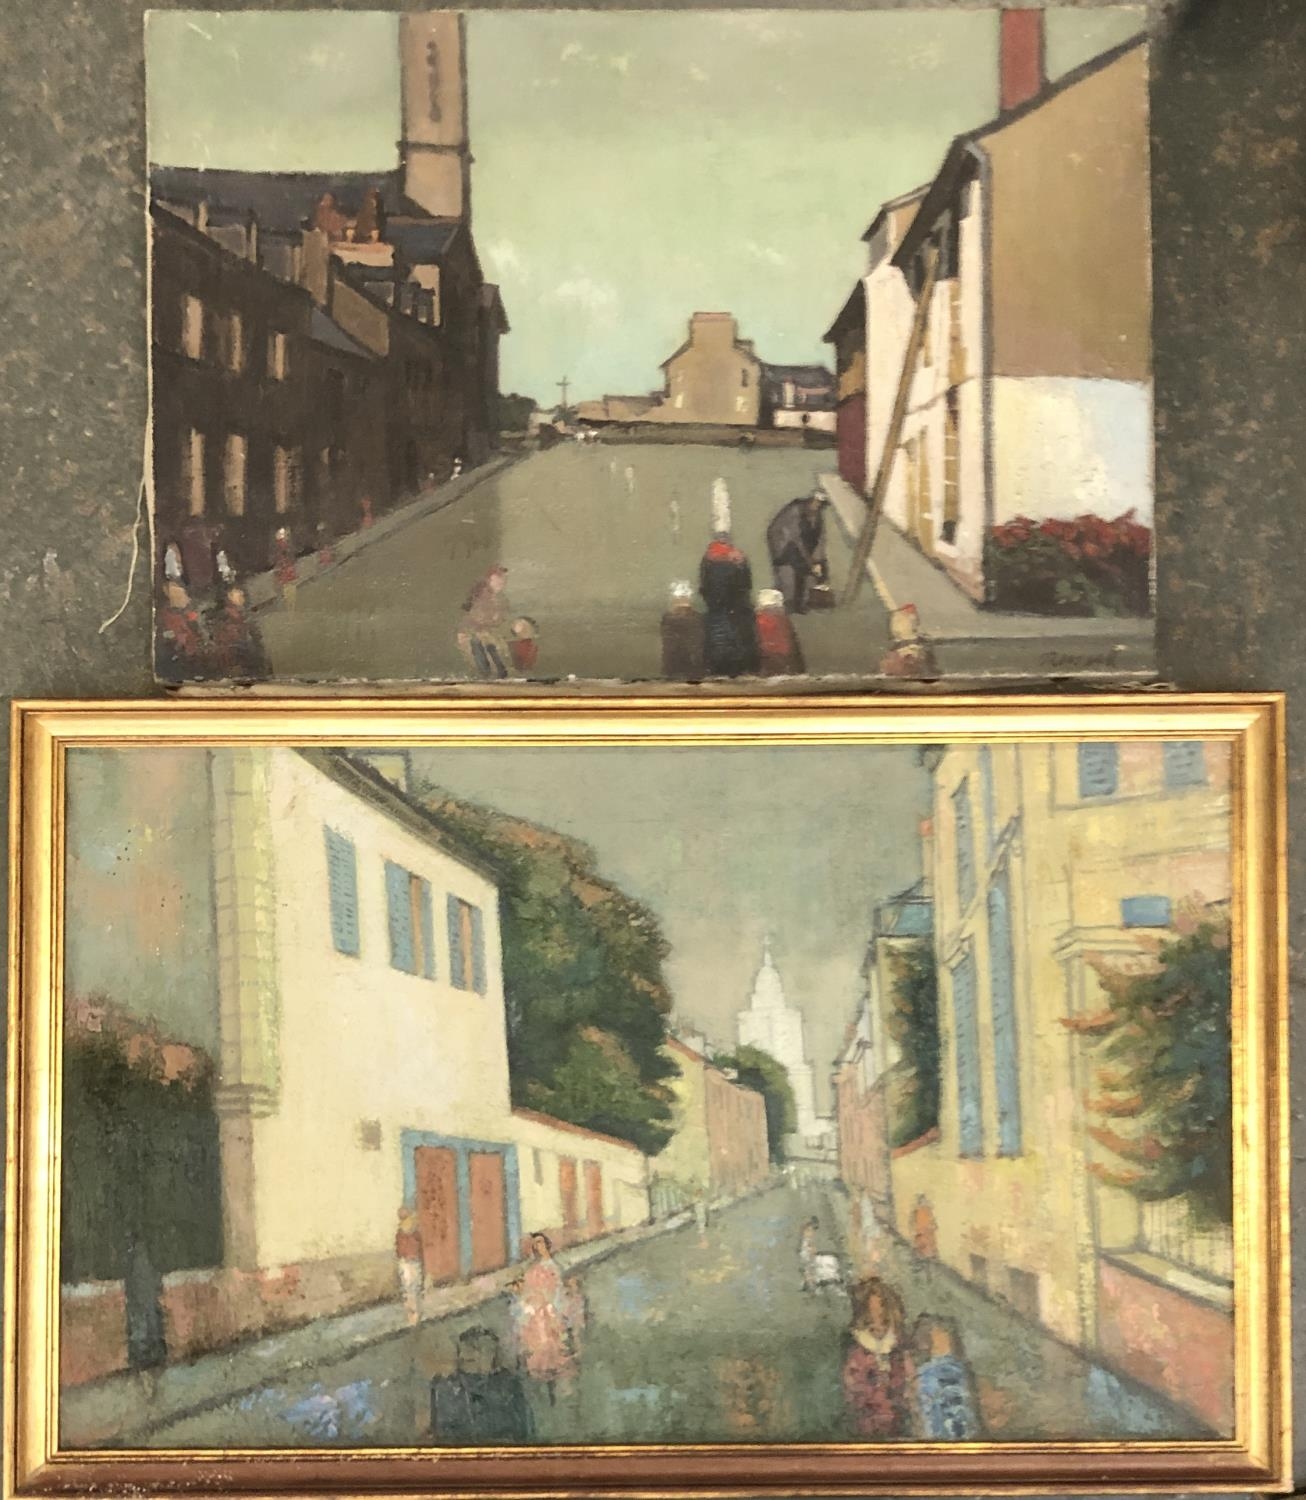 Rodney Fryer Russell (1918-1996), two street scenes, oils on canvas, 42x70cm and 41x61cm (2)